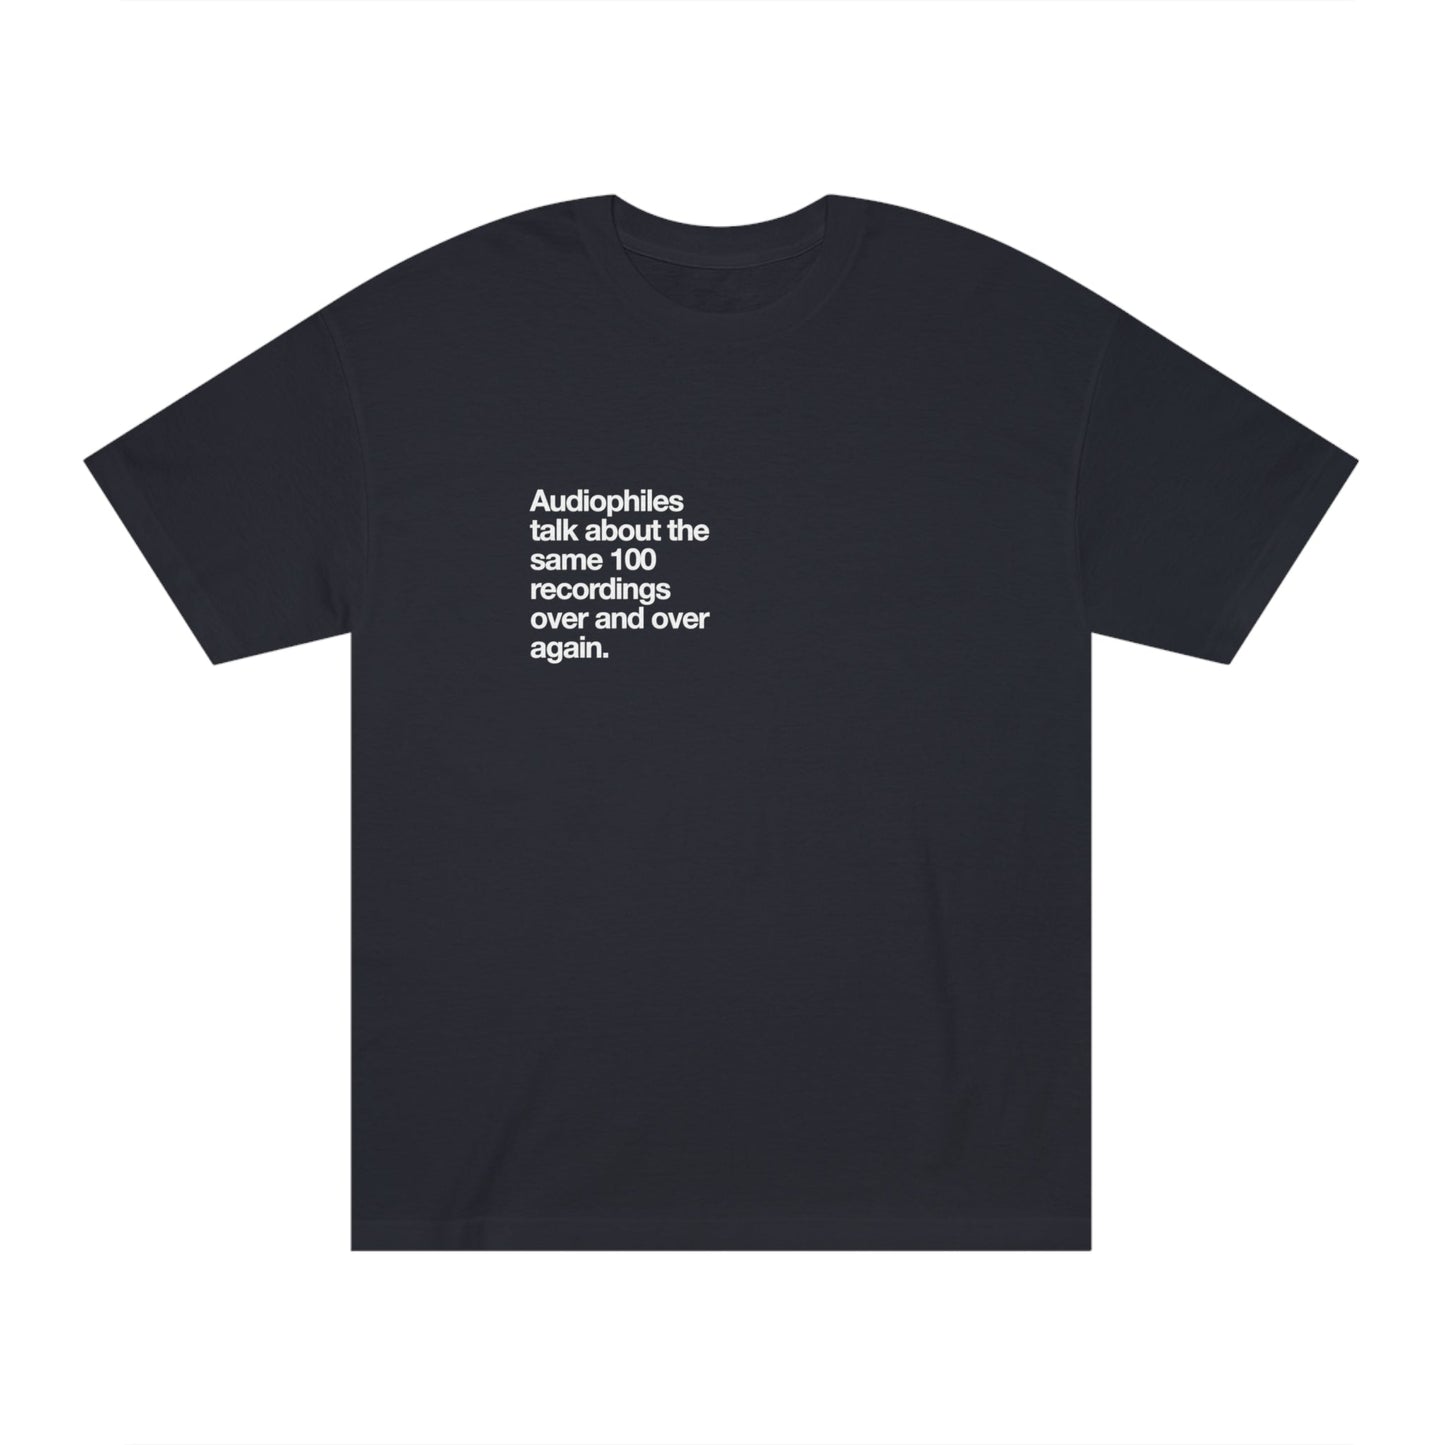 Audiophiles talk about the same 100 records over and over again t'shirt. - Pure Neo Shop